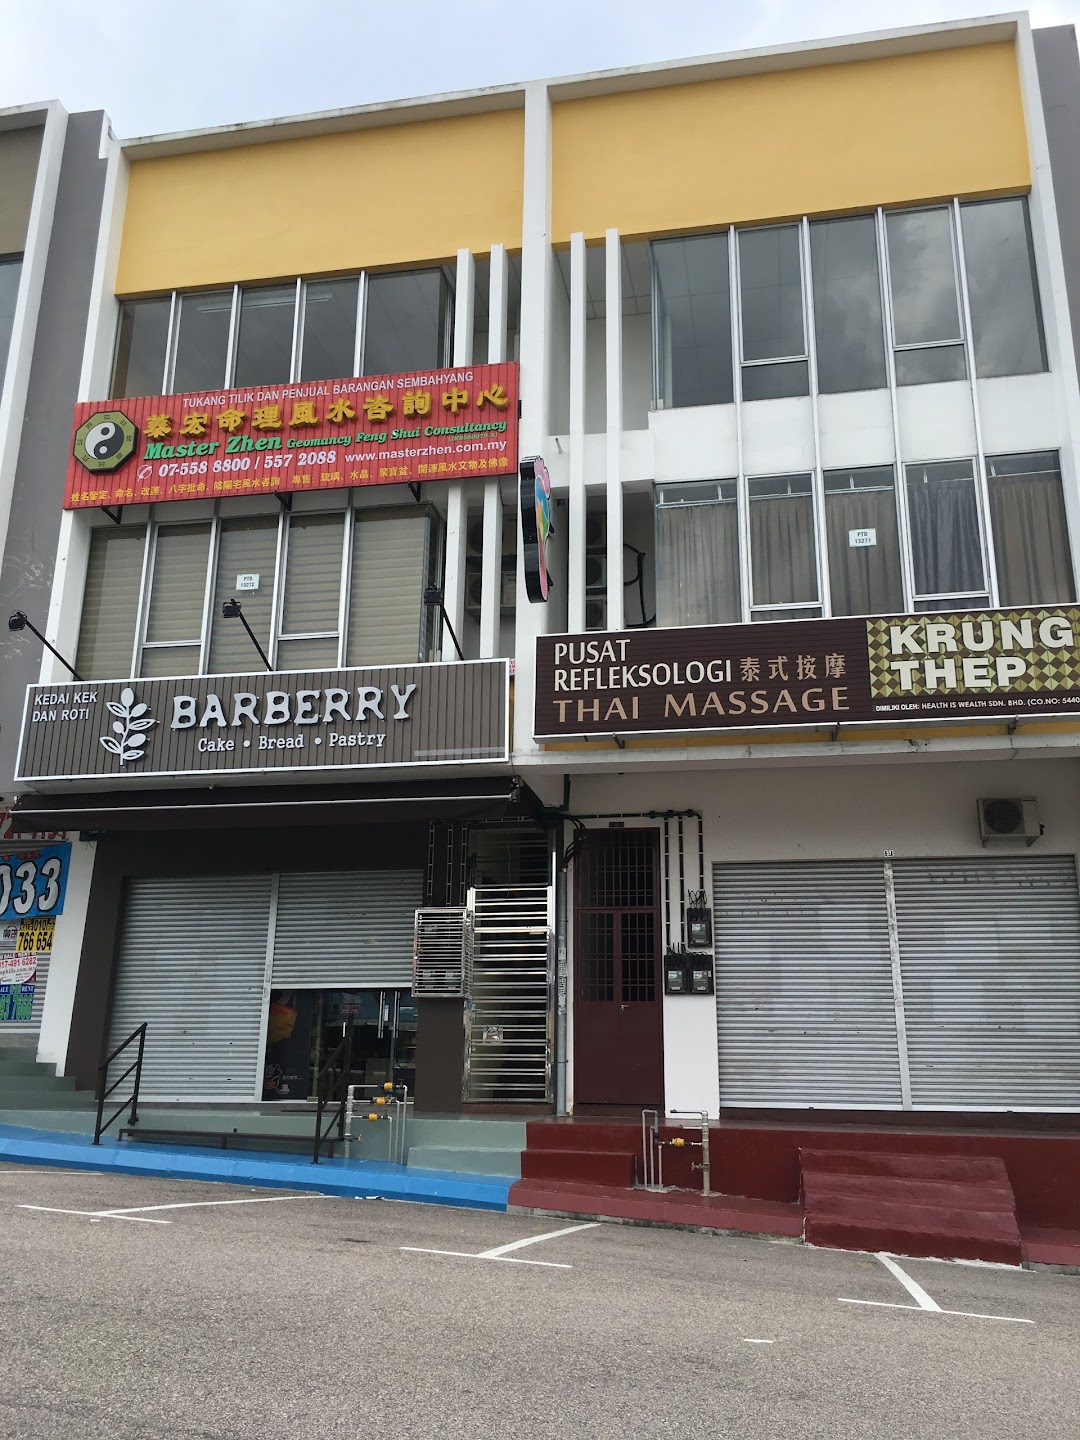 Barberry Bakery